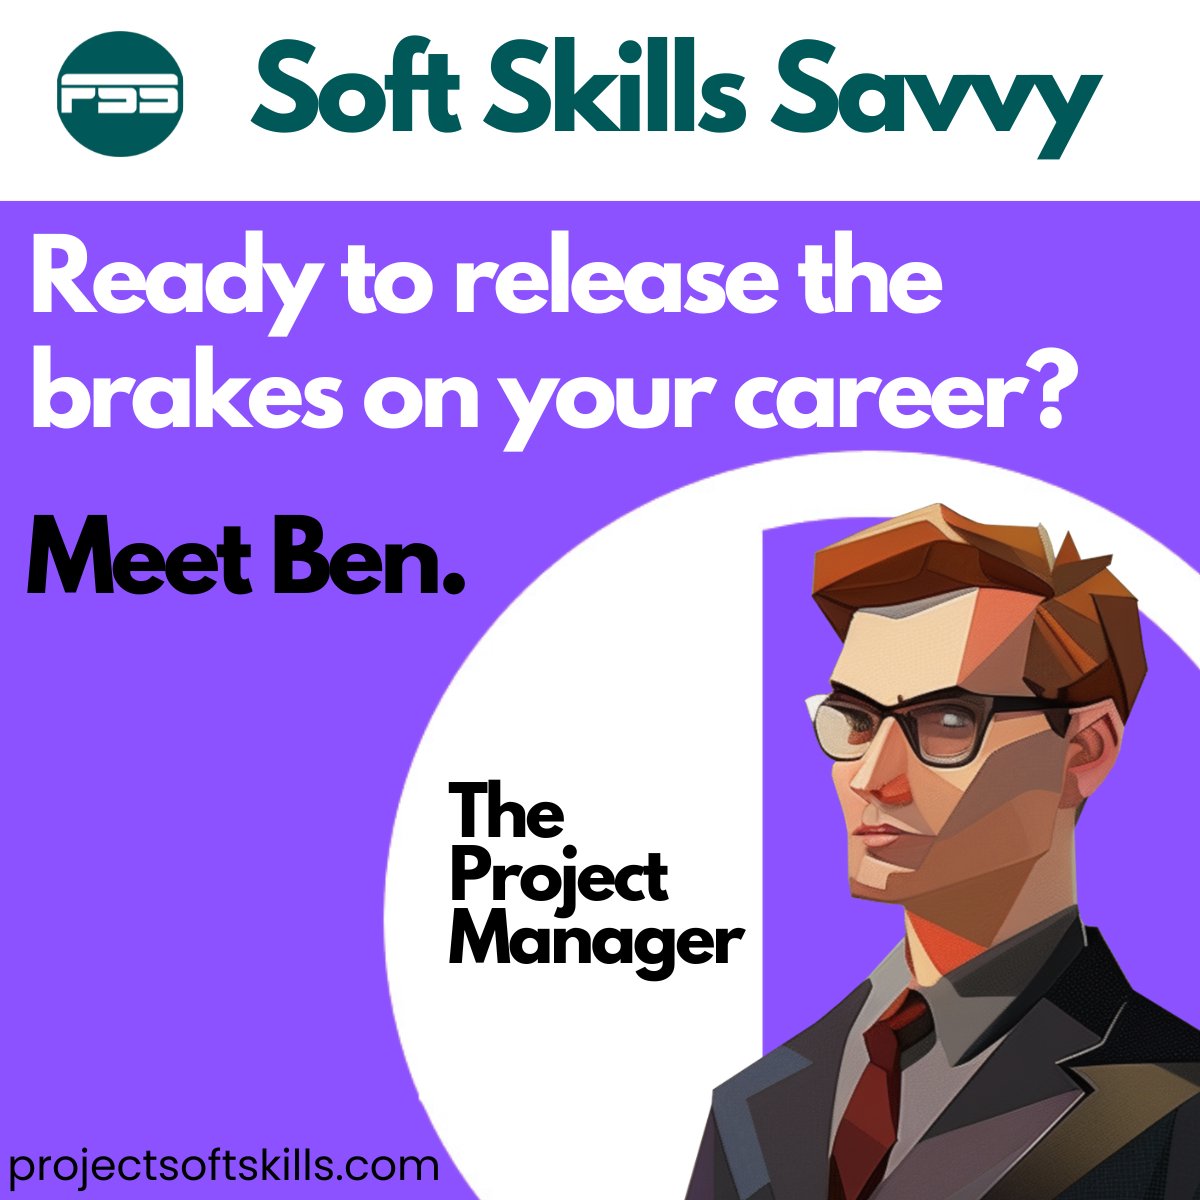 🚀Soft Skills Savvy: Ready to Release the Brakes on Your Career?
 Discover your Project Manager Archetype at projectsoftskills.com/project-manage…!
👉 Visit now and start your journey!

#ProjectManagement #SoftSkillsSavvy #CareerGrowth #ProjectSoftskills #PMArchetypes